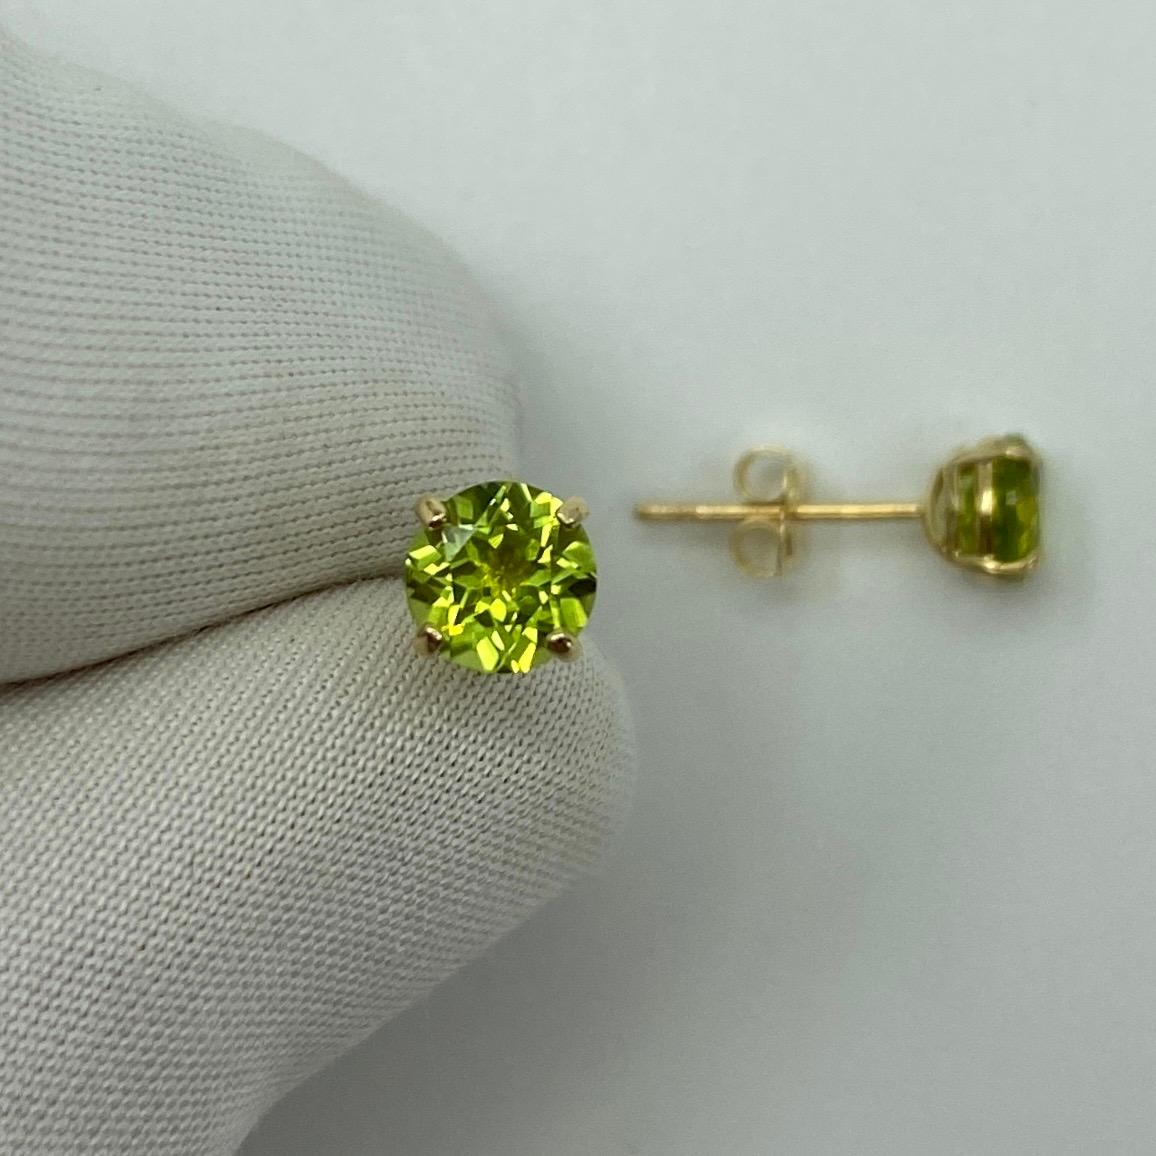 Natural Vivid Green 1.00 Carat Peridot Yellow Gold Earring Studs.

Beautiful 5mm matching pair of round peridot with vivid green colour, excellent clarity and an excellent round brilliant cut.

Set in lightweight 9k yellow gold suds with butterfly